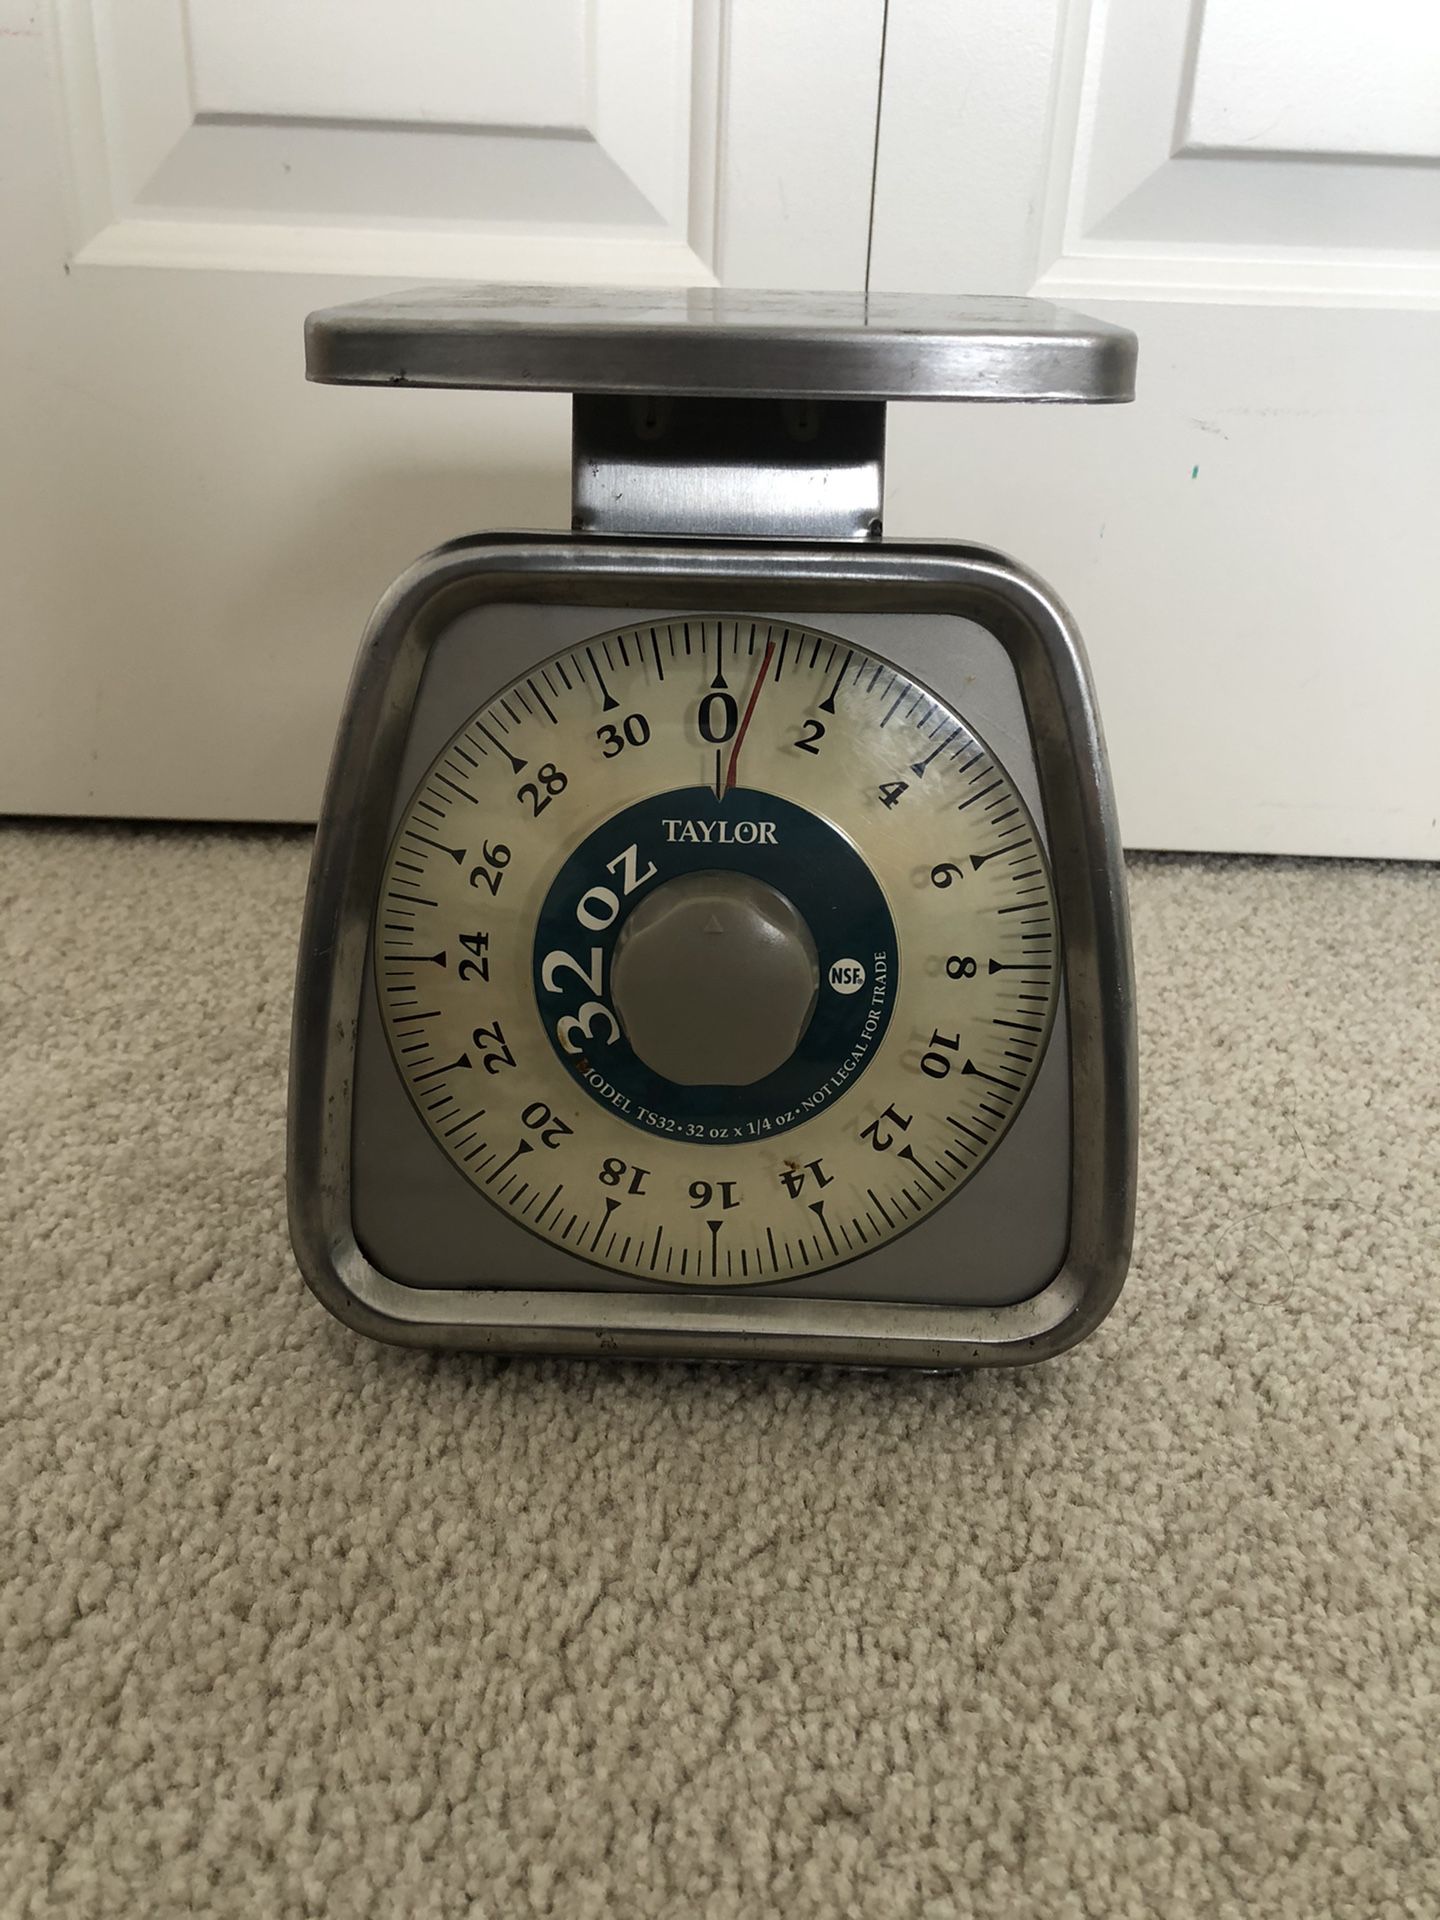 Kitchen Food Scale